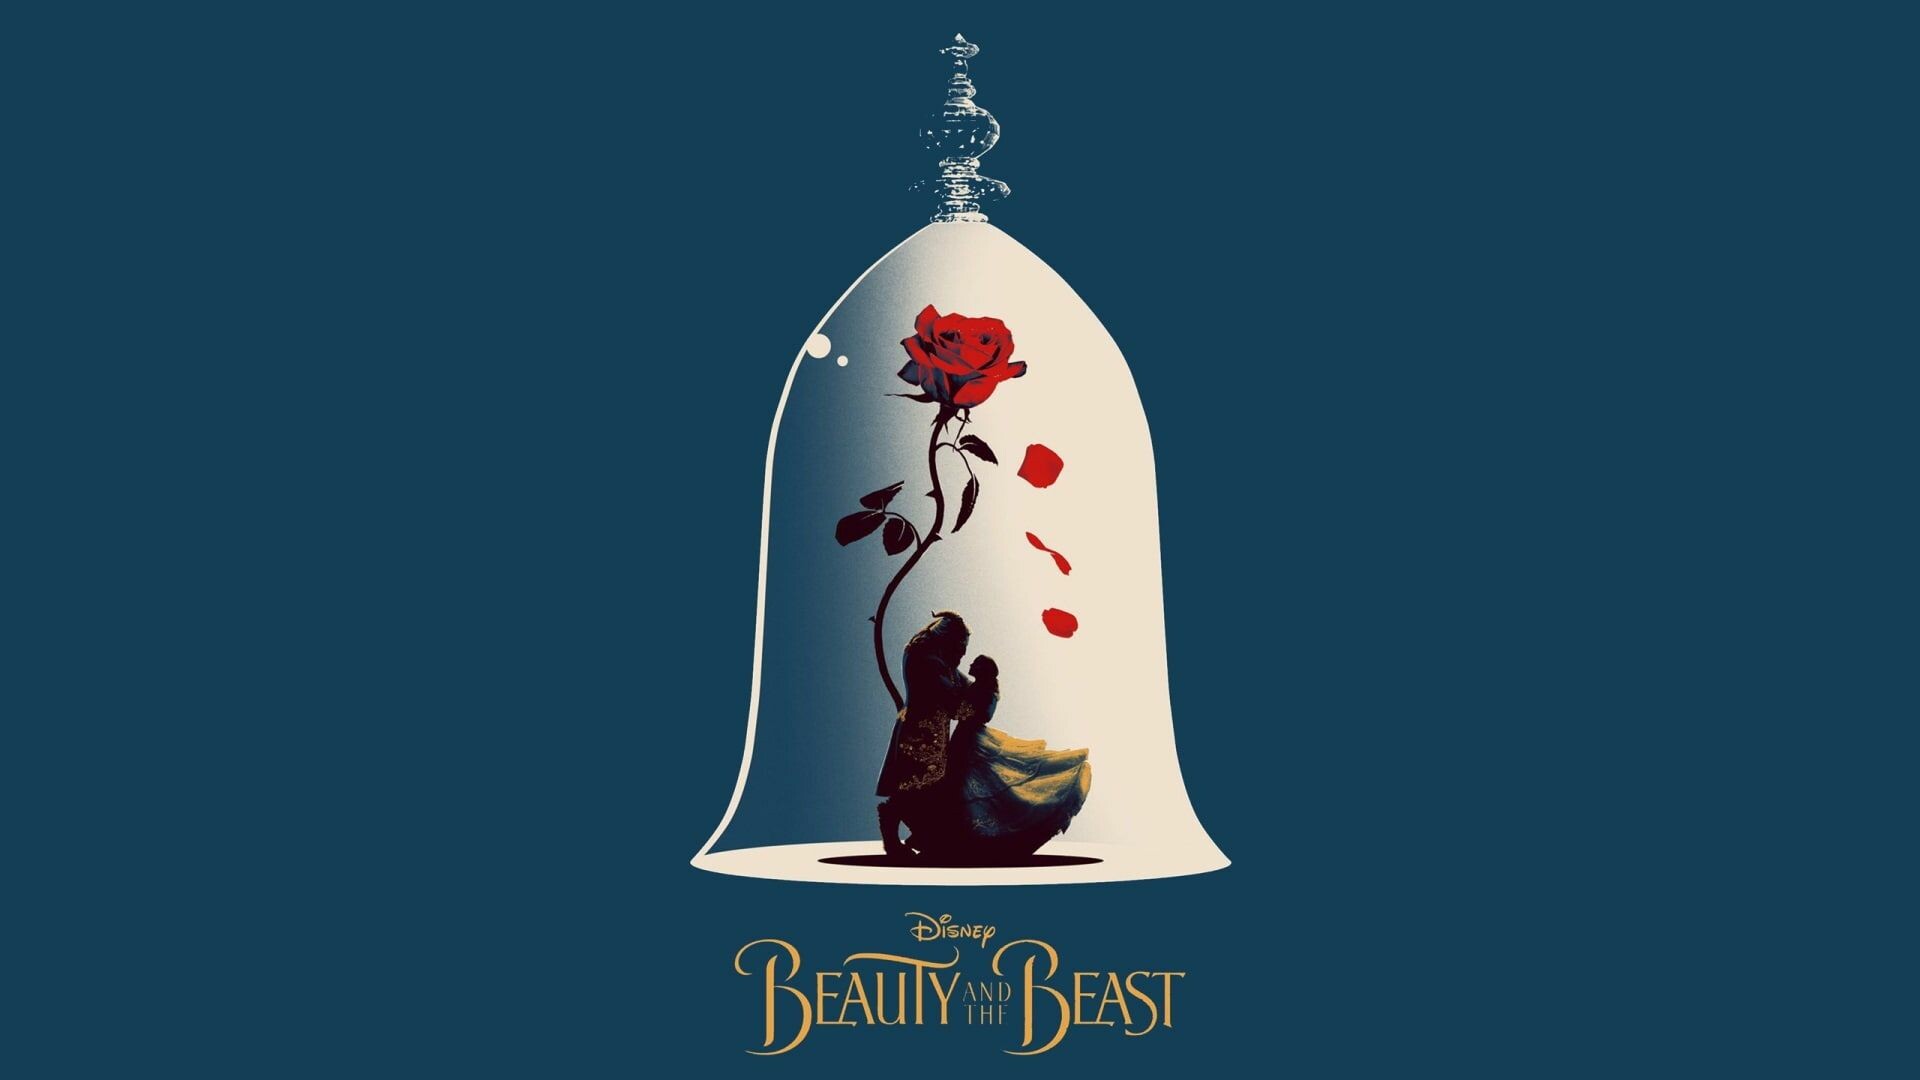 Beauty and the Beast: The Enchanted Rose, A mystical flower. 1920x1080 Full HD Wallpaper.